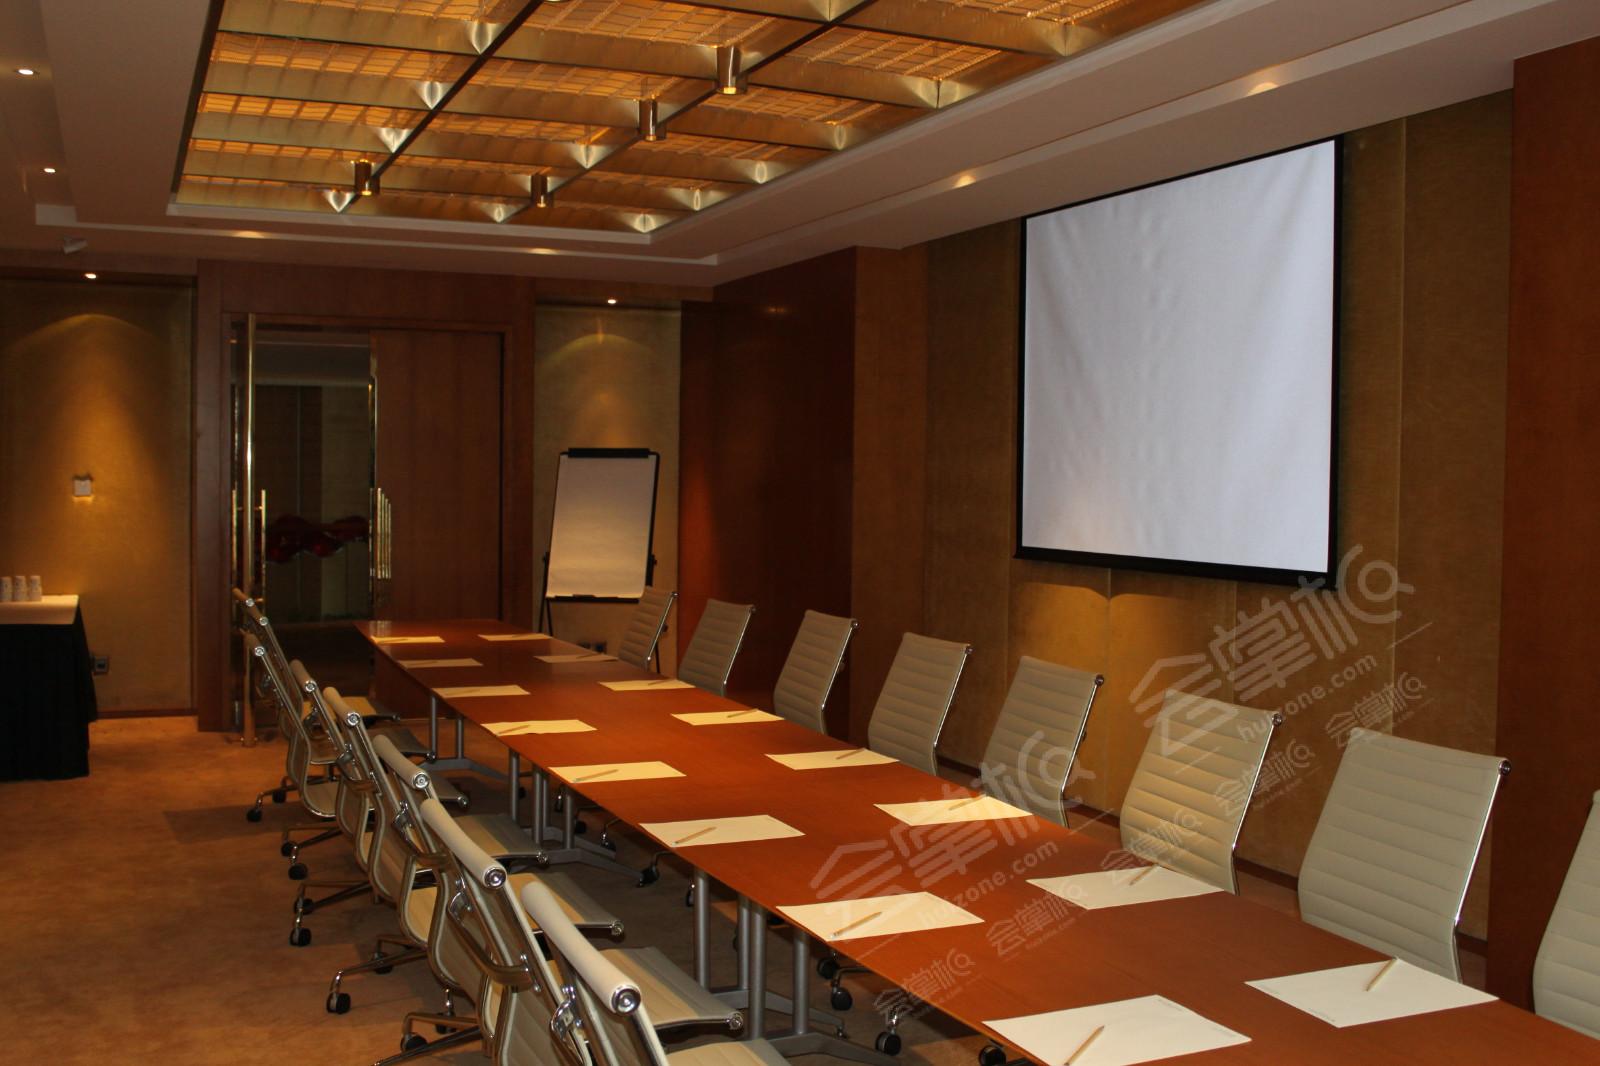 Conference rooｍⅡ